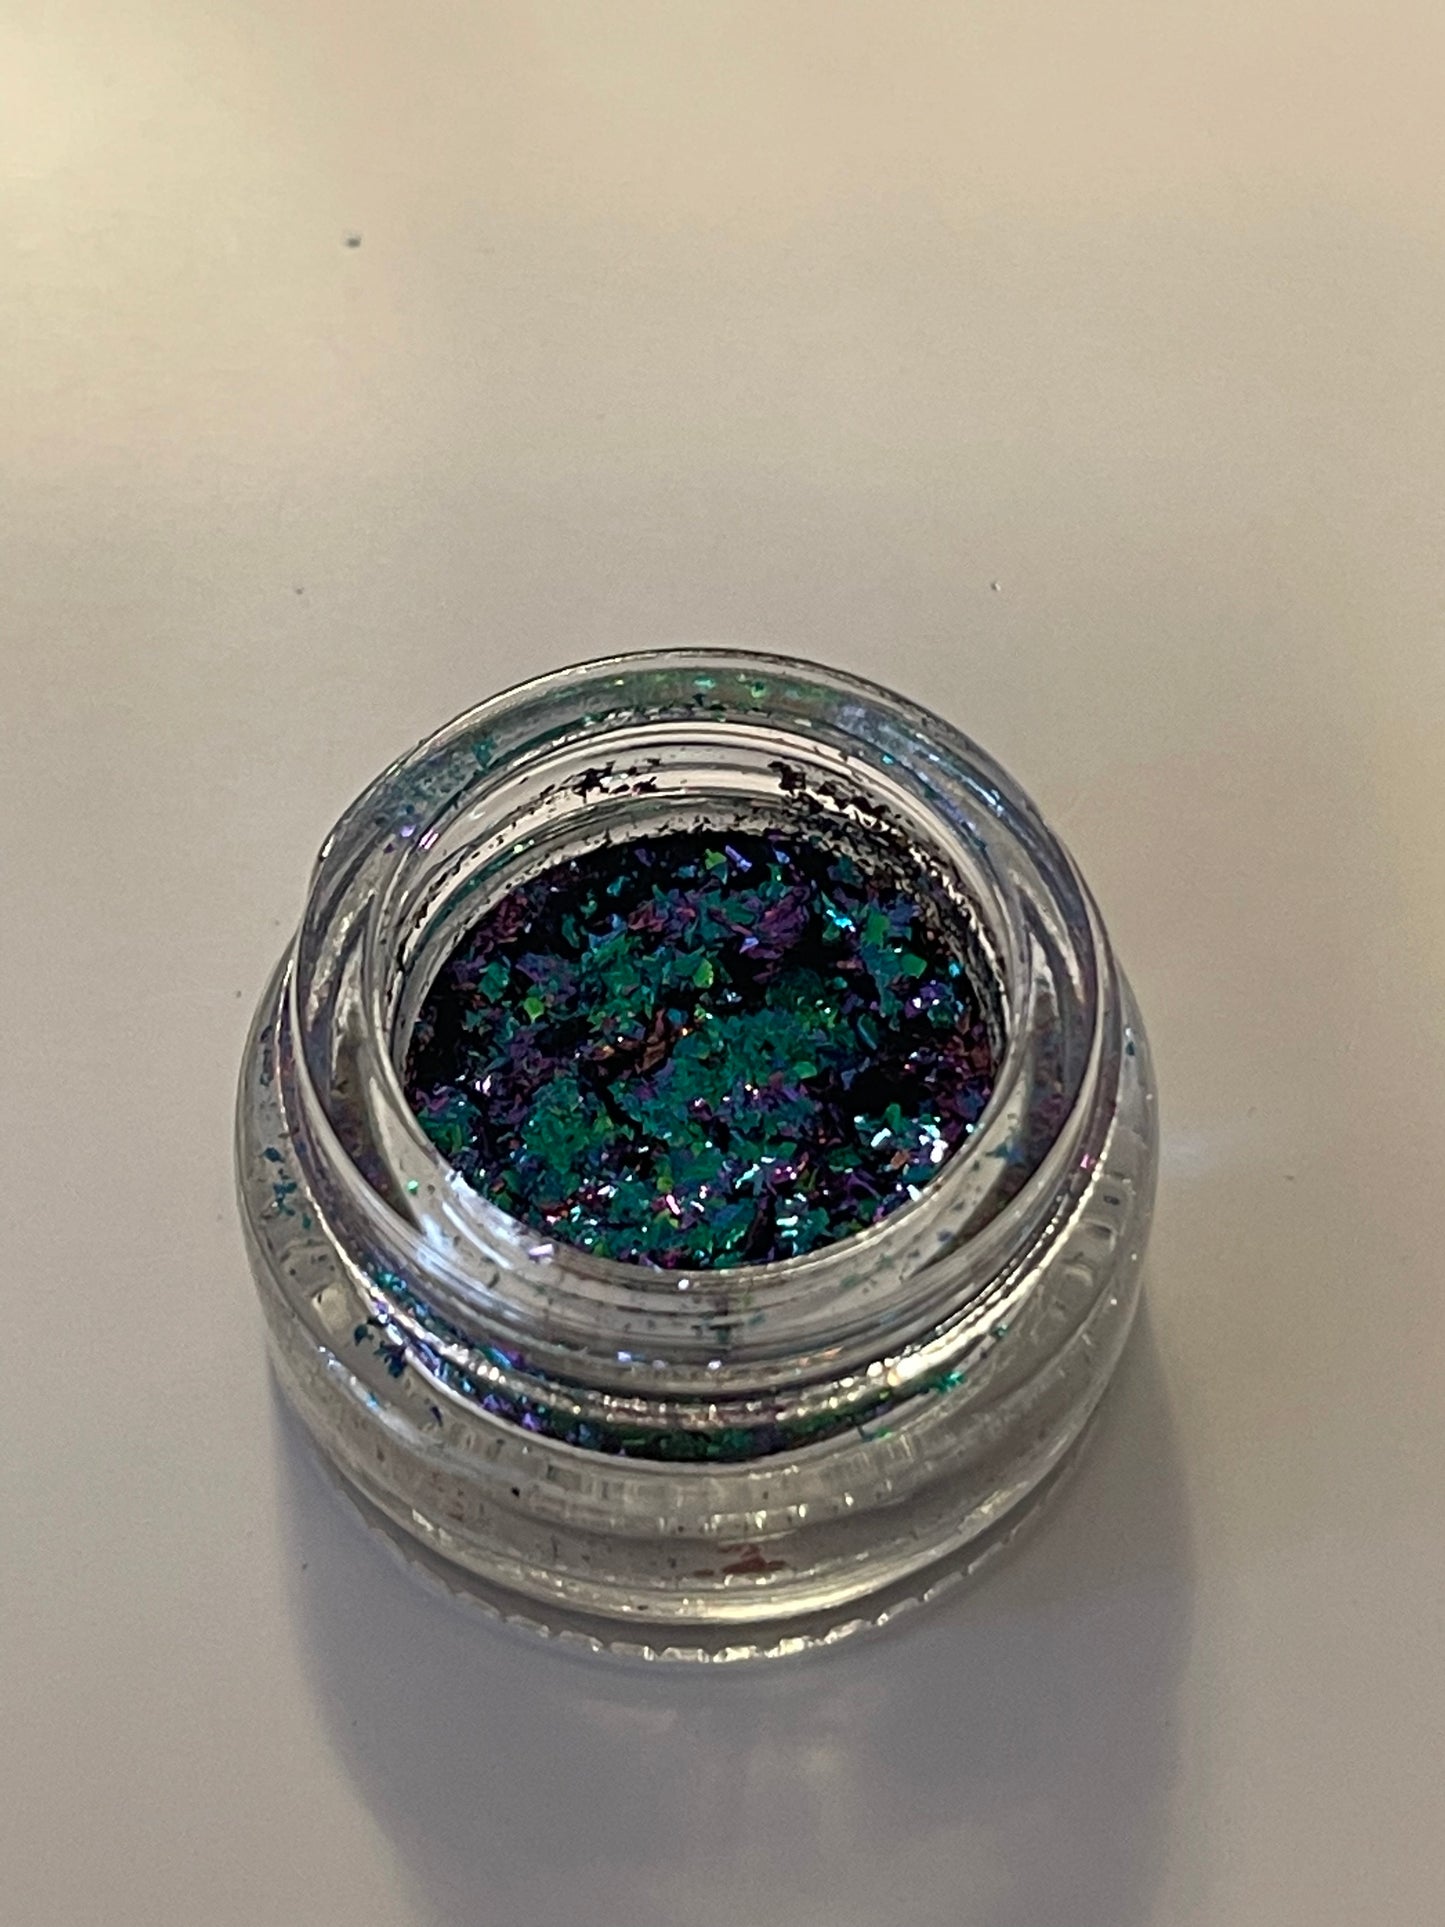 Wicked Witch- Multichrome Chameleon Makeup Flakes